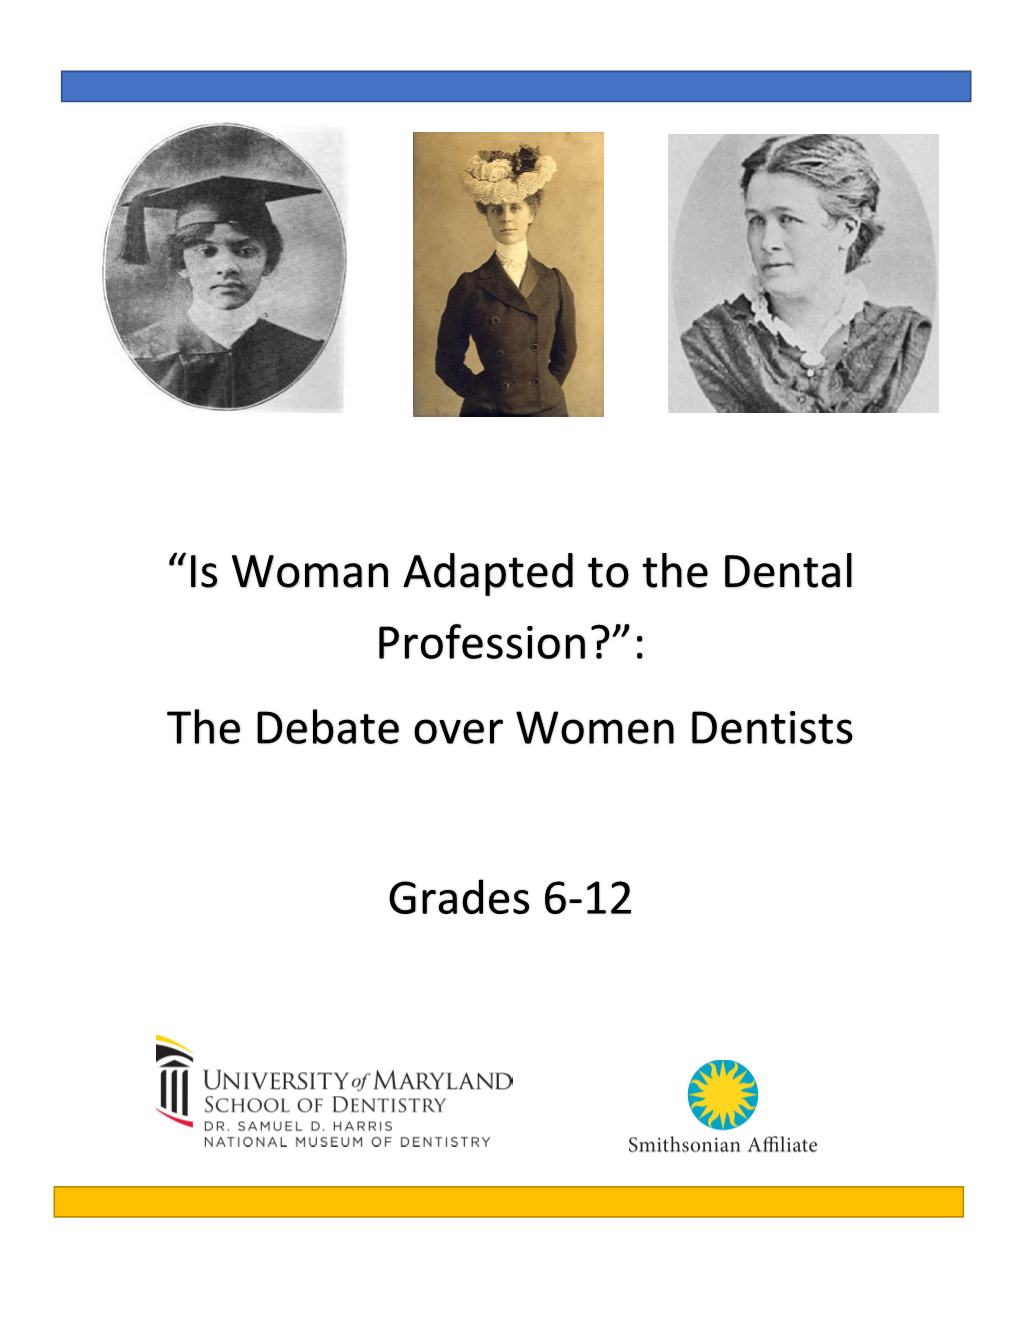 “Is Woman Adapted to the Dental Profession?”: the Debate Over Women Dentists